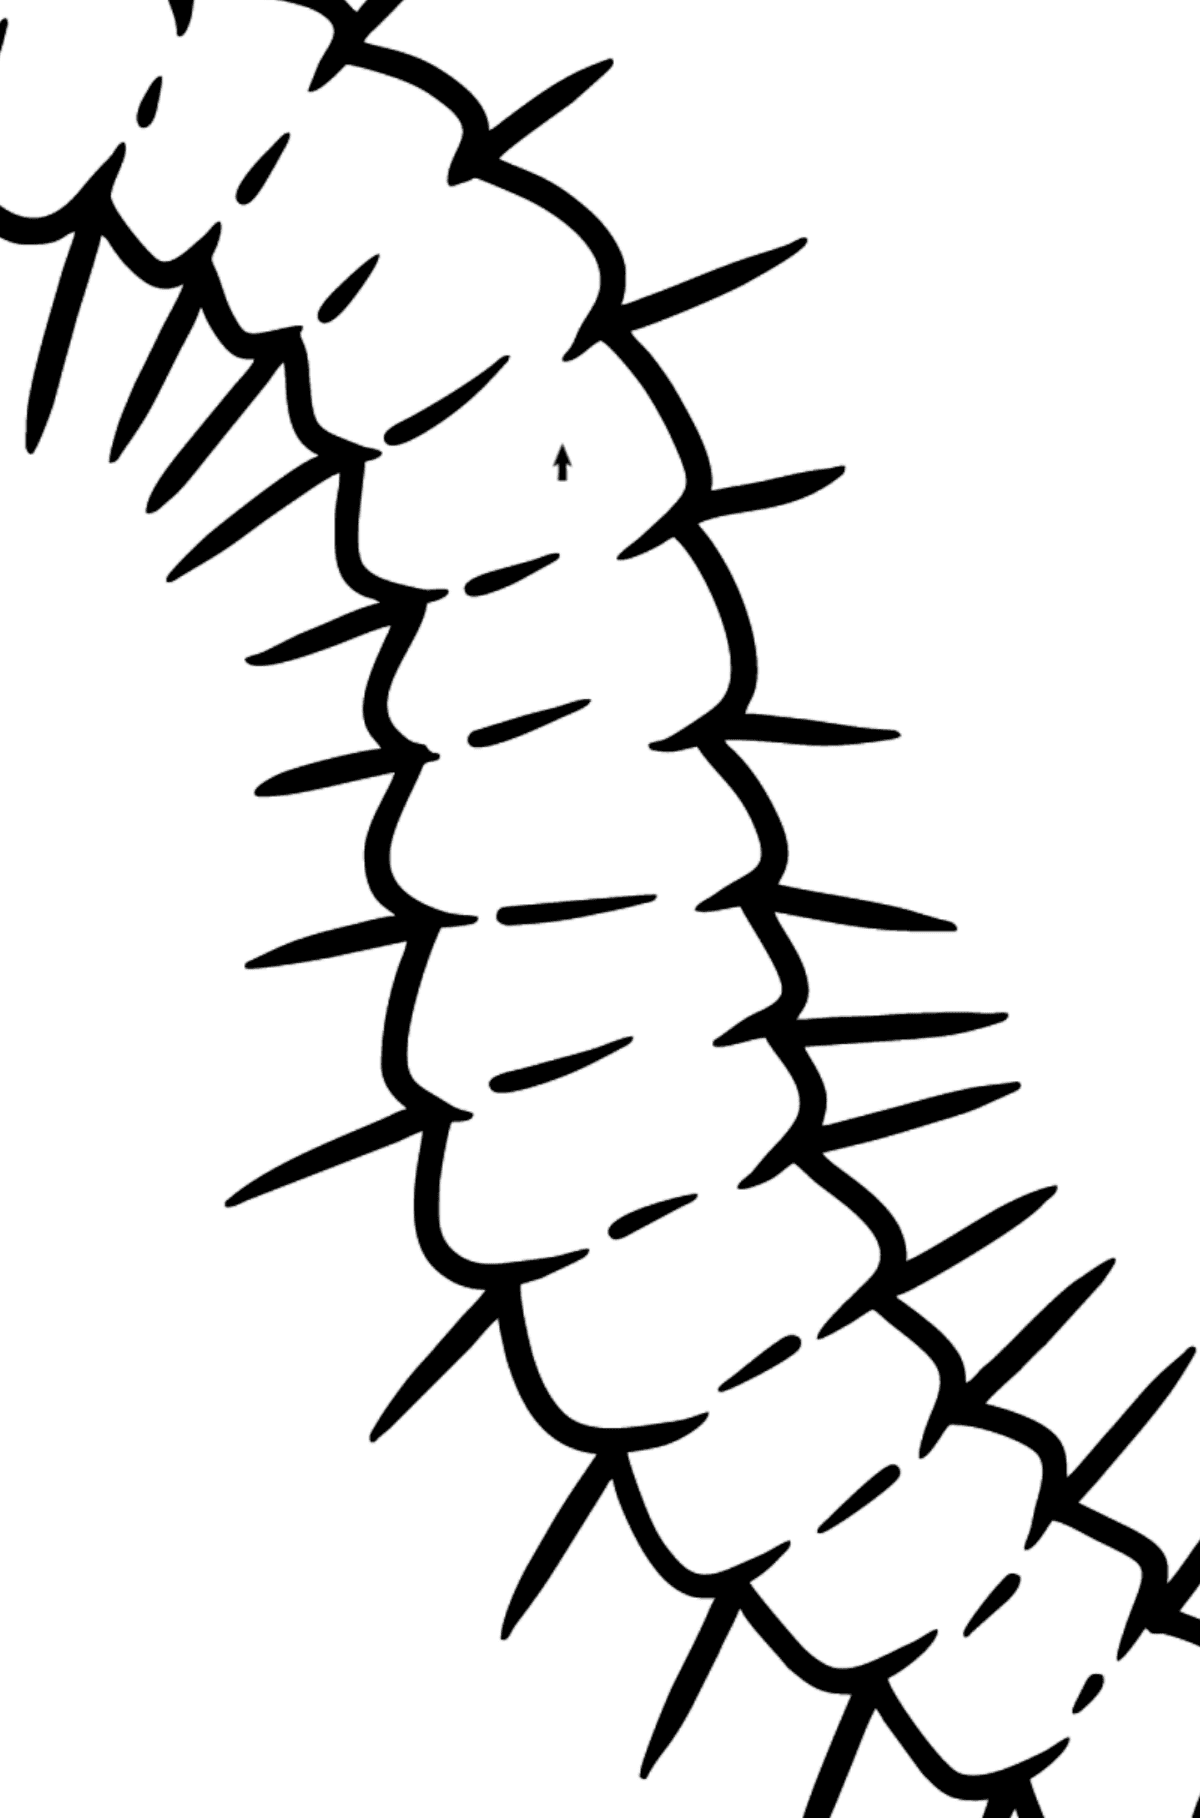 Centipede coloring page - Coloring by Symbols for Kids